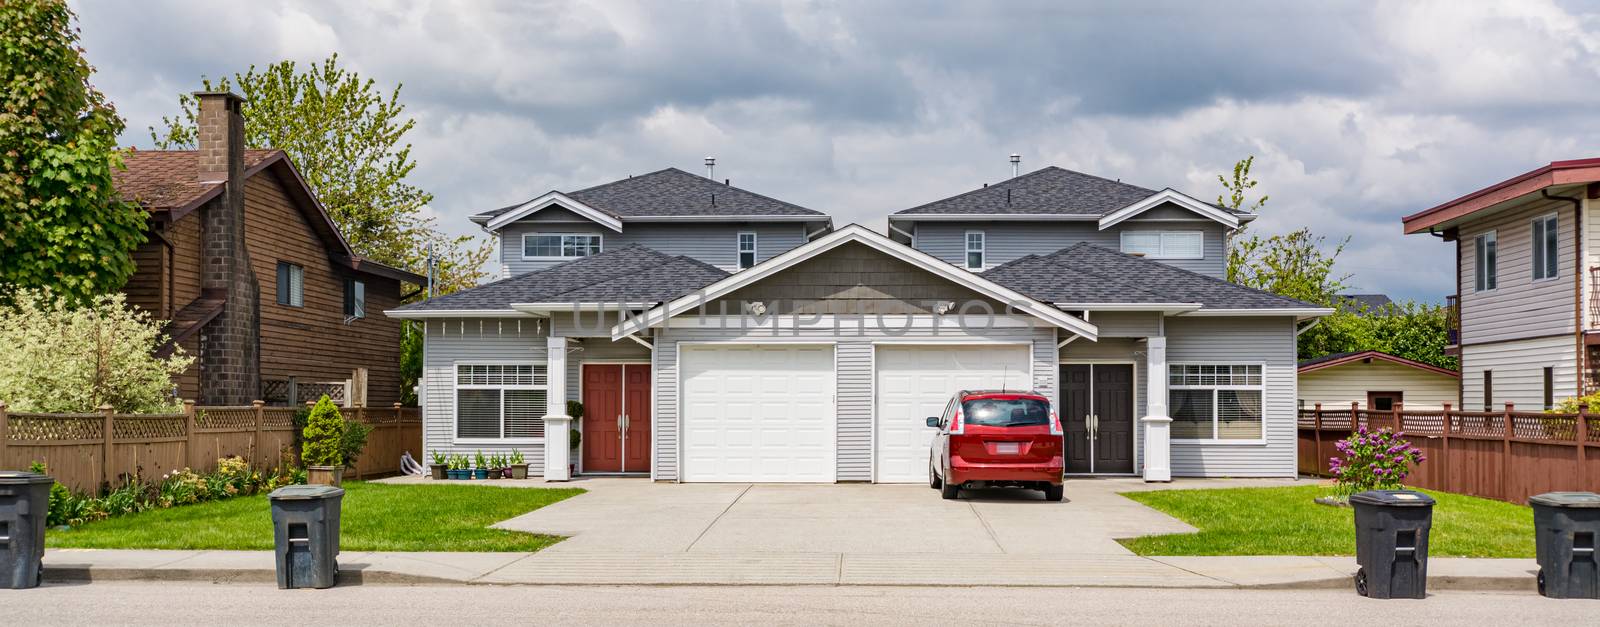 Residential duplex townhouse with red car parked on concret driveway by Imagenet